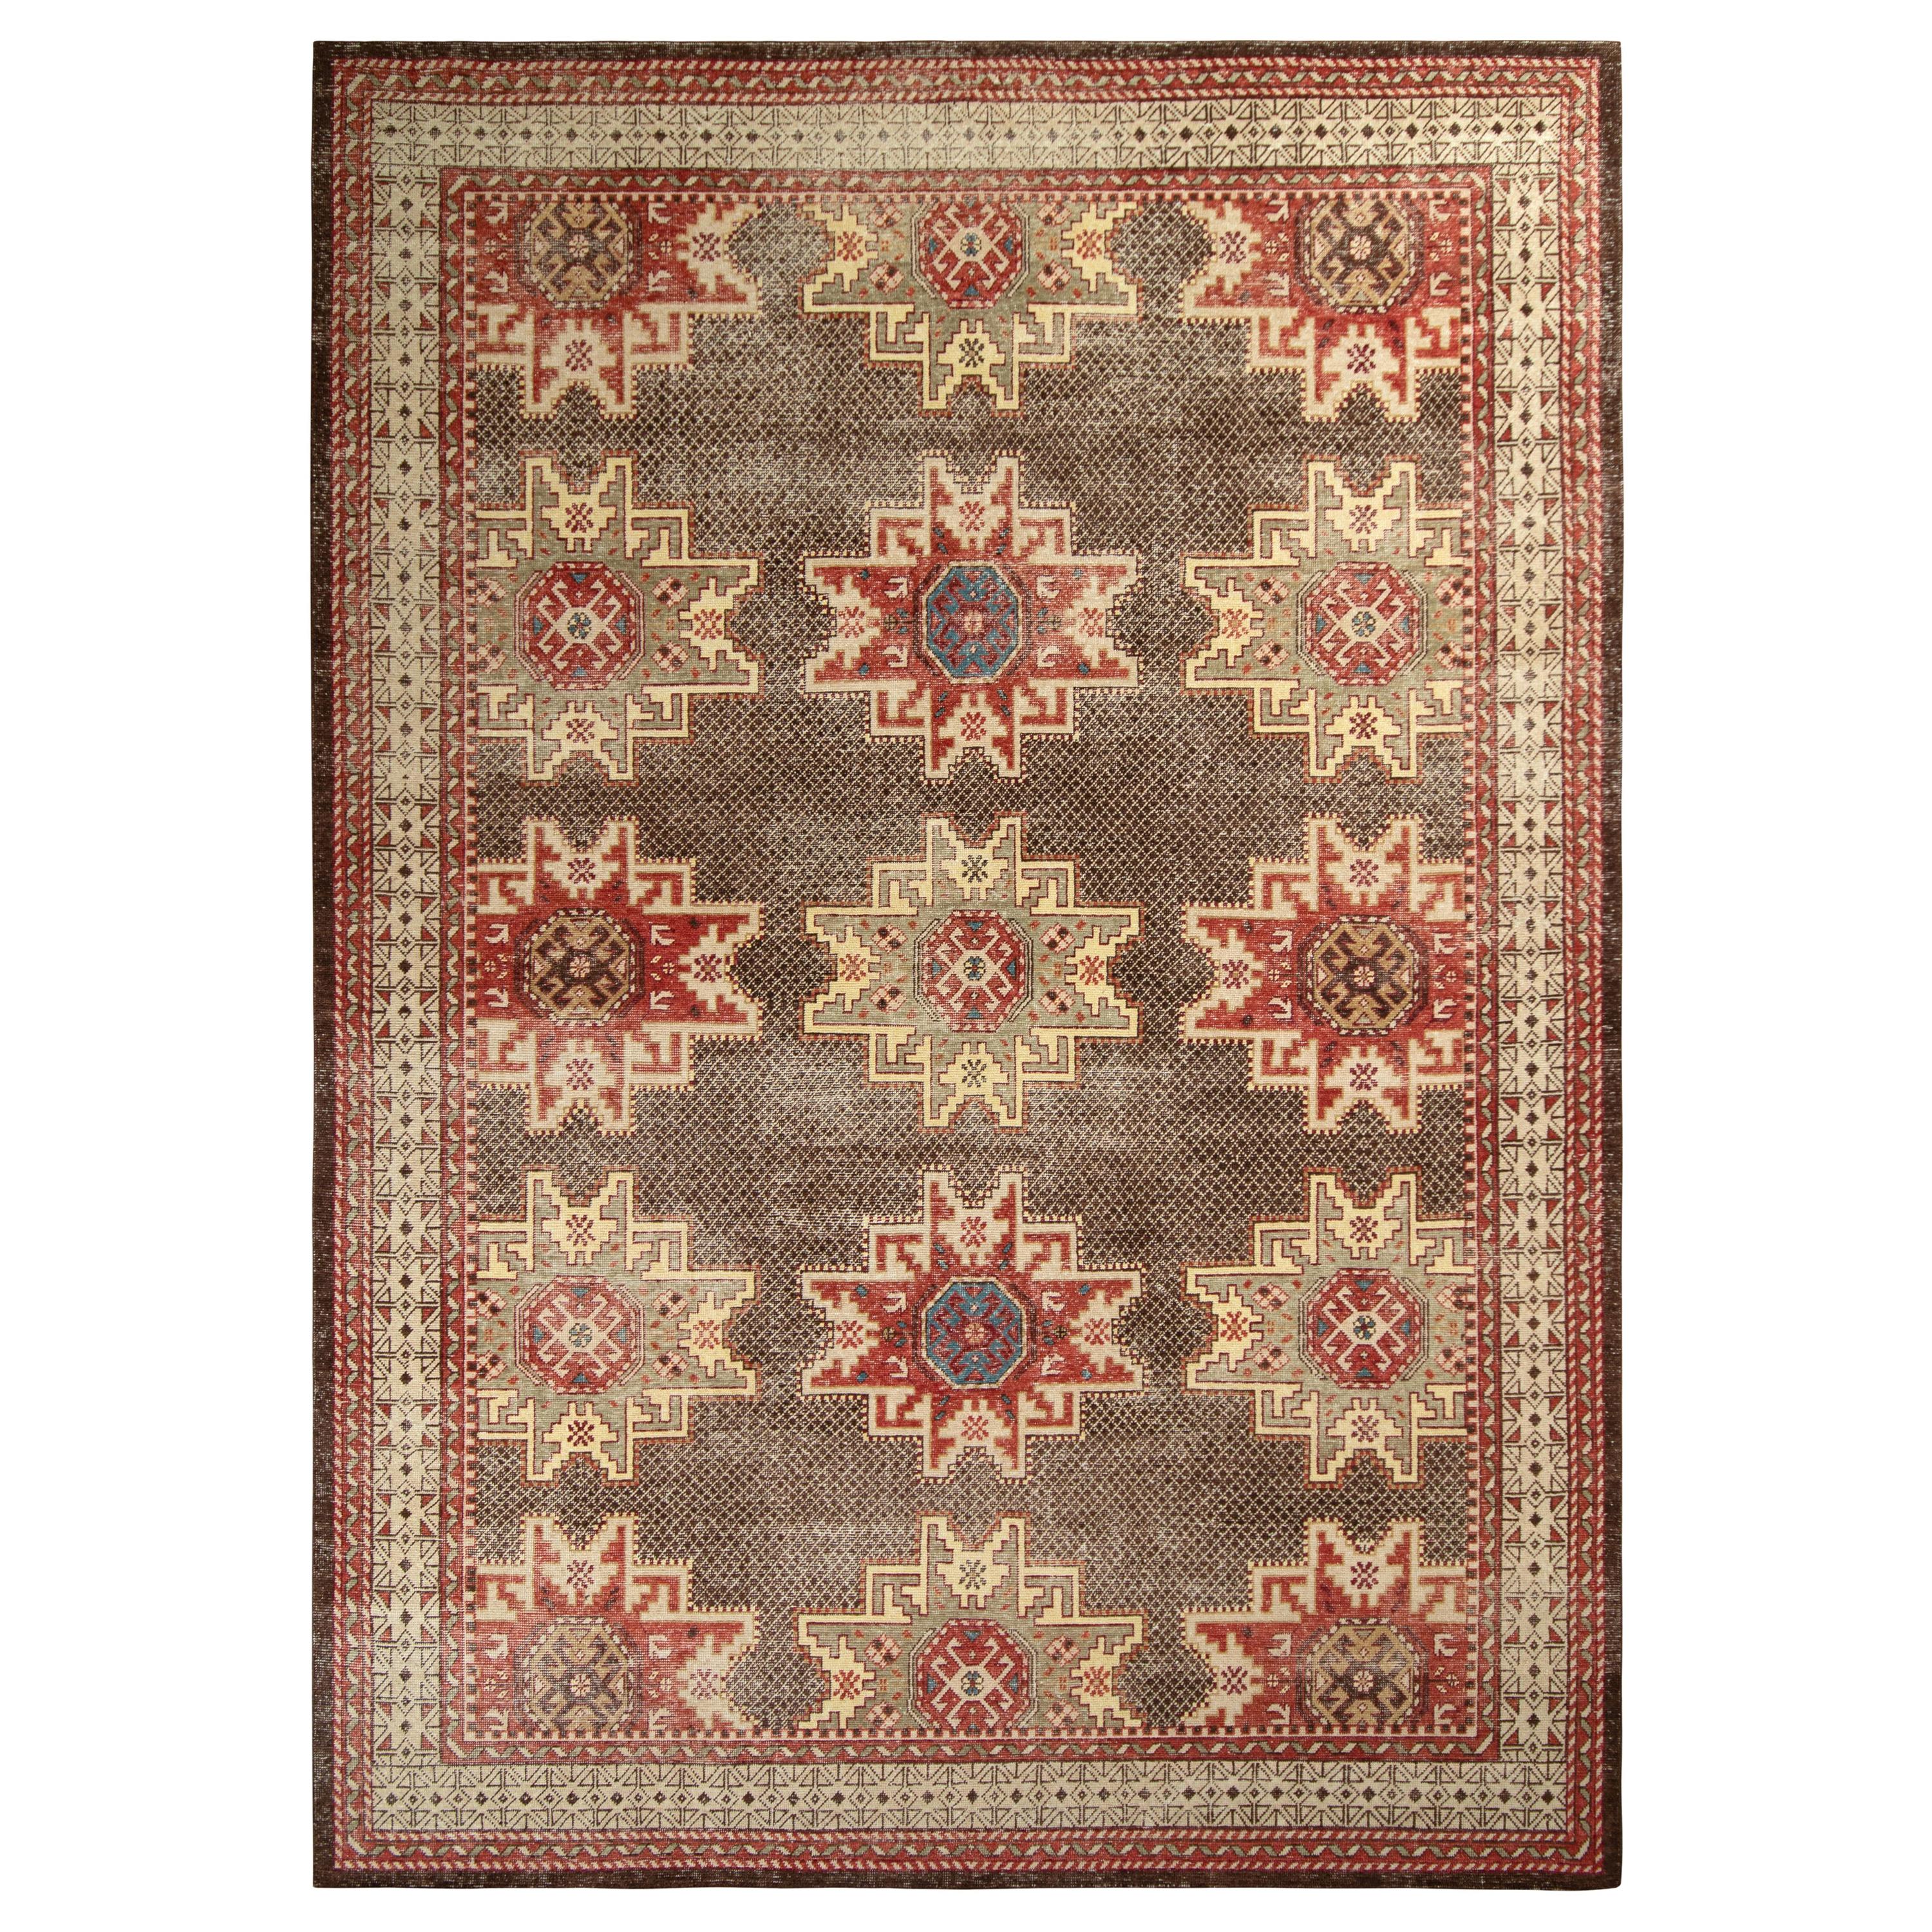 Rug & Kilim’s Distressed Kuba Style Rug in Beige-Brown and Red Geometric Pattern For Sale